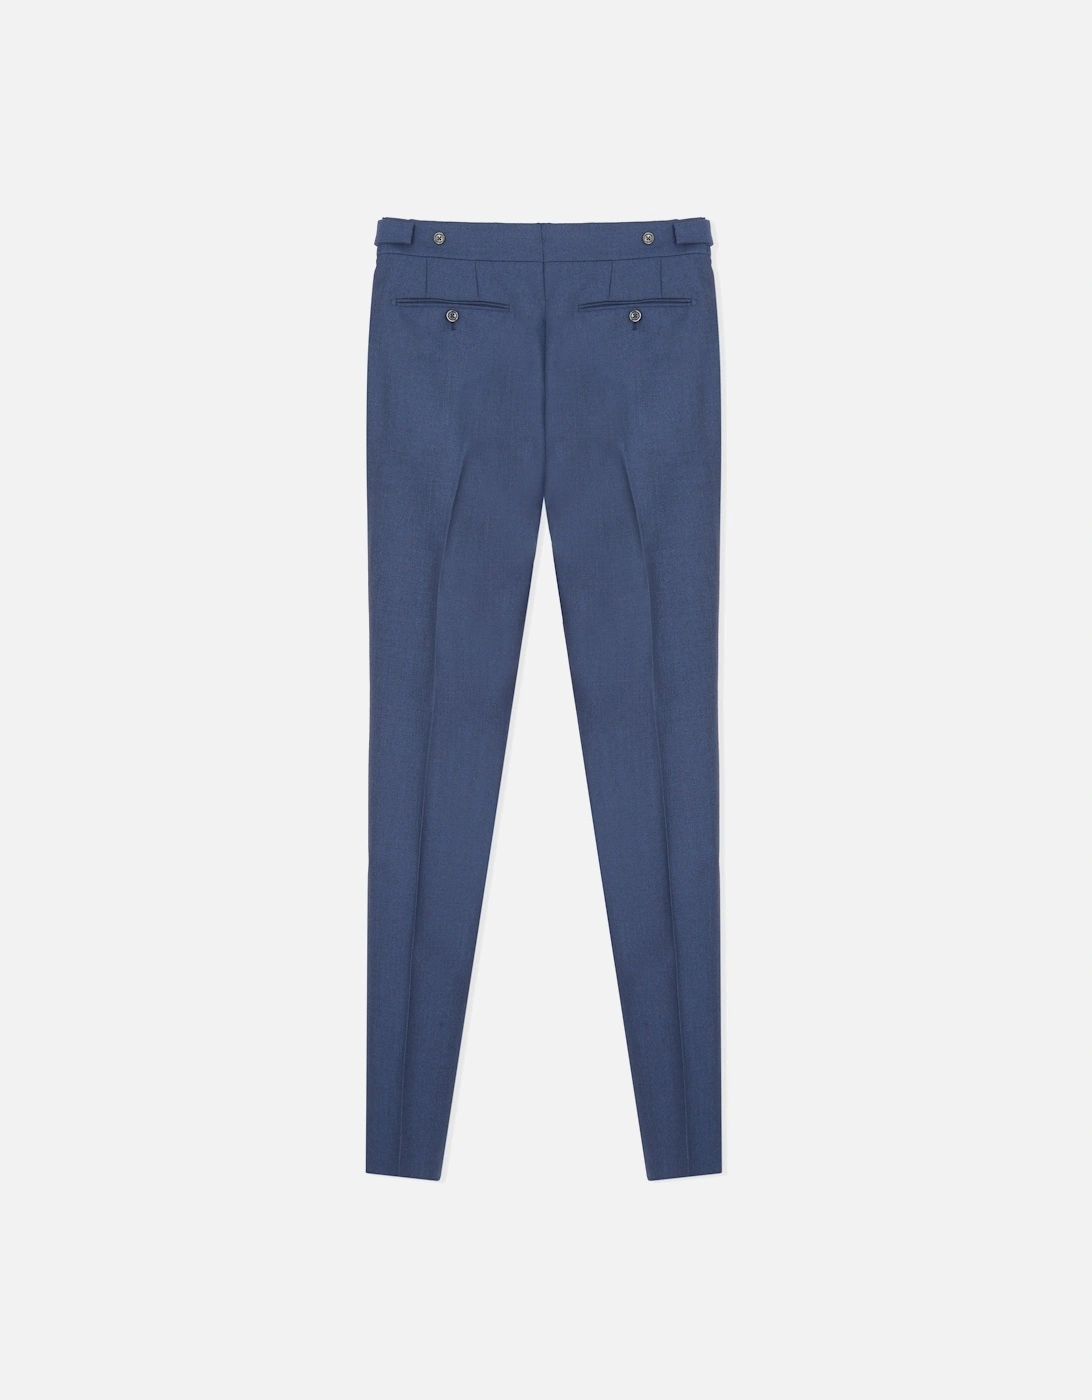 Mohair Atticus Trousers Navy